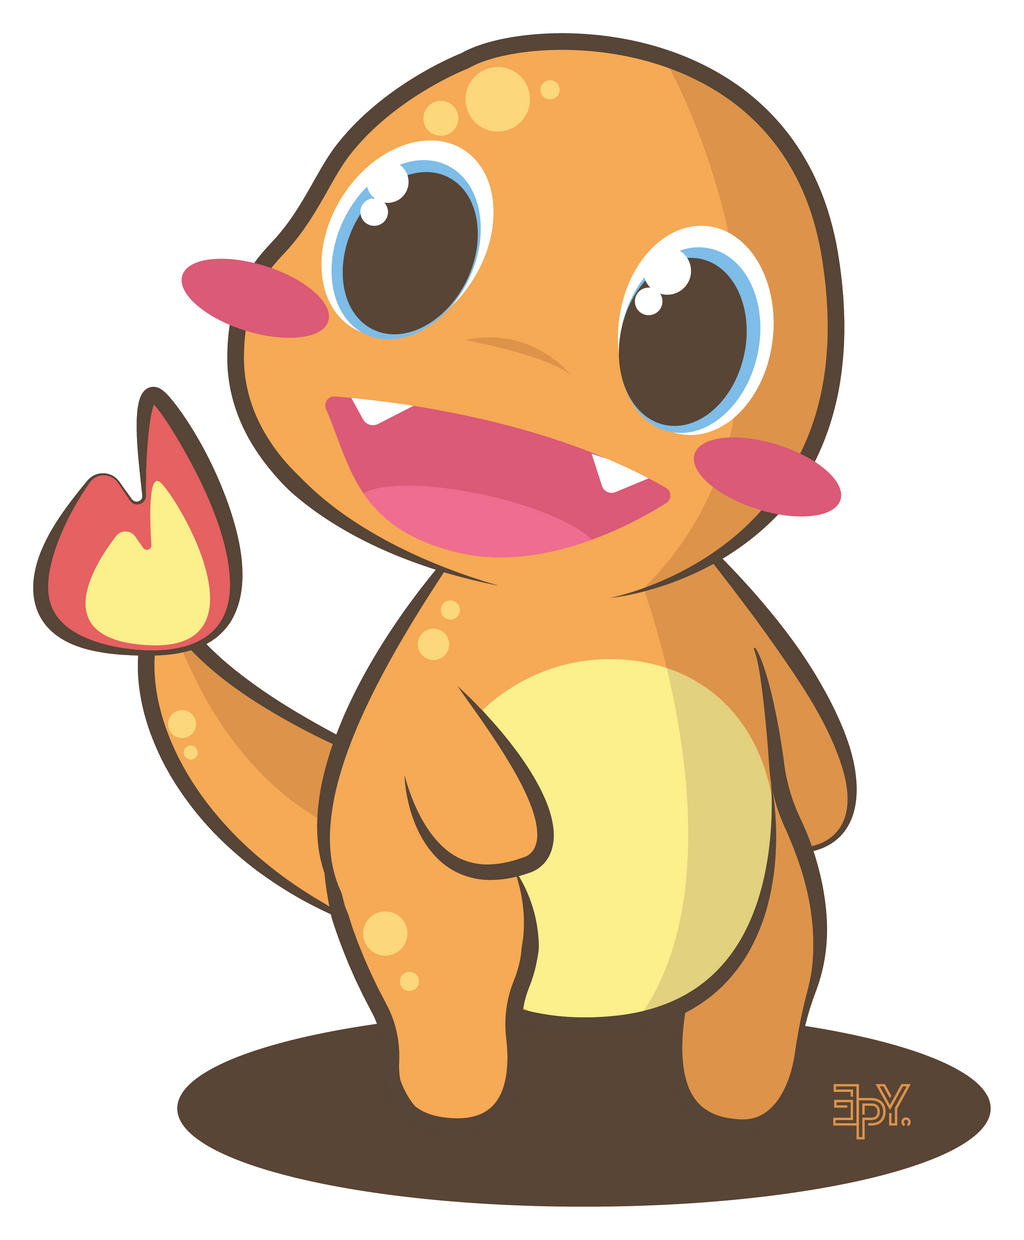 cute_charmander_by_oukokudesign_dcwgrzu-fullview.png